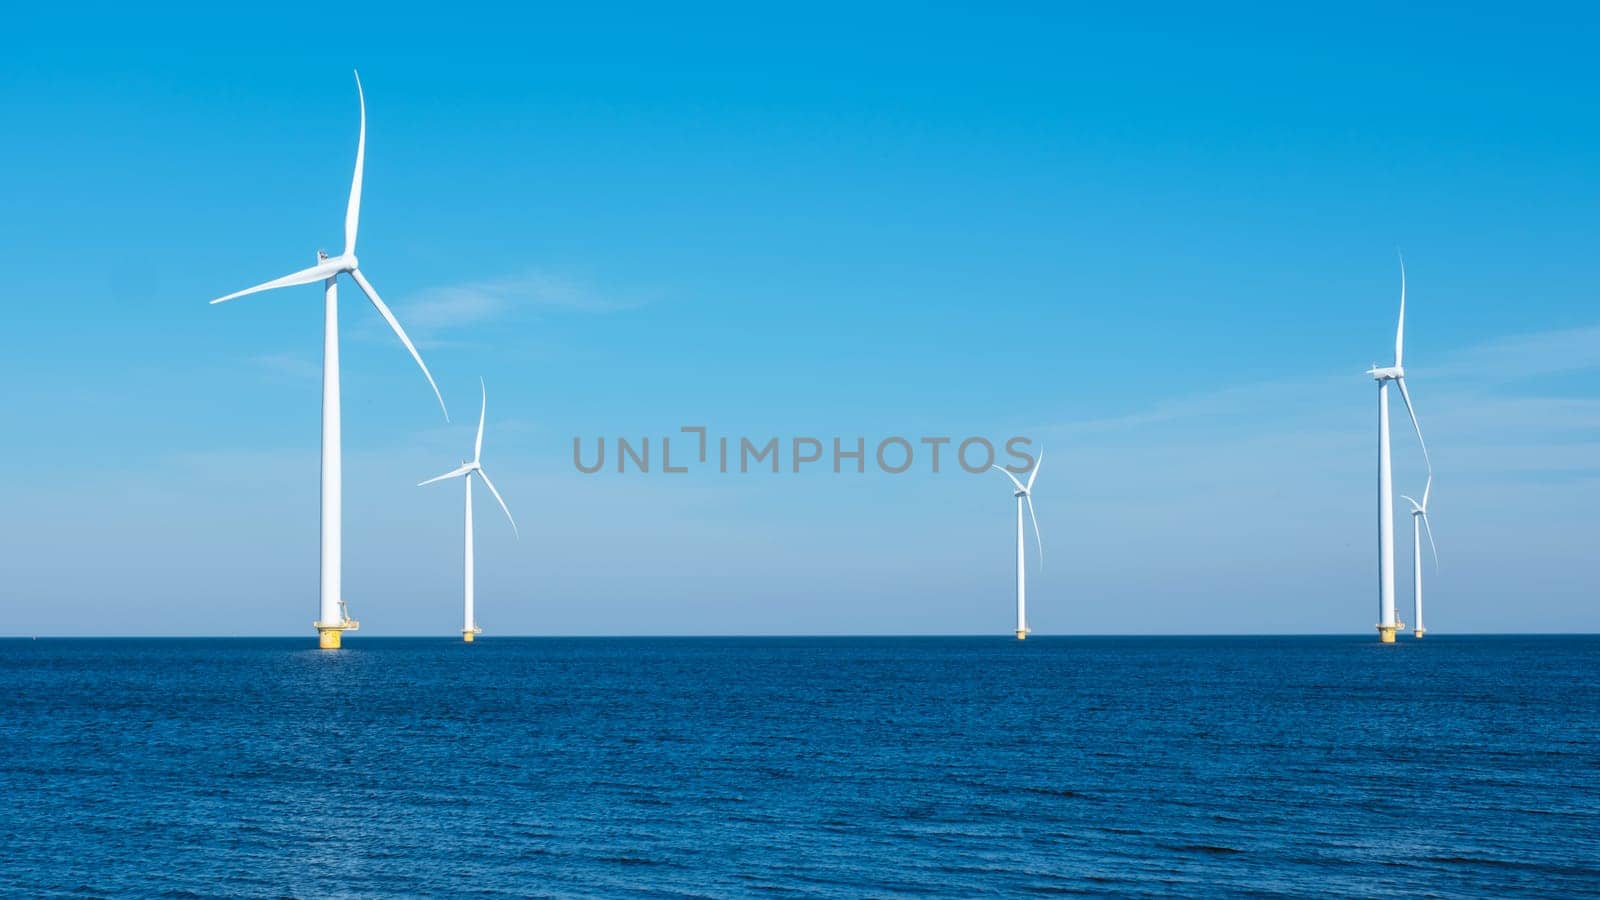 A majestic row of wind turbines rises from the ocean in the Netherlands Flevoland, harnessing the power of the wind to generate clean energy. Windmill turbines at sea green energy transition in Europe